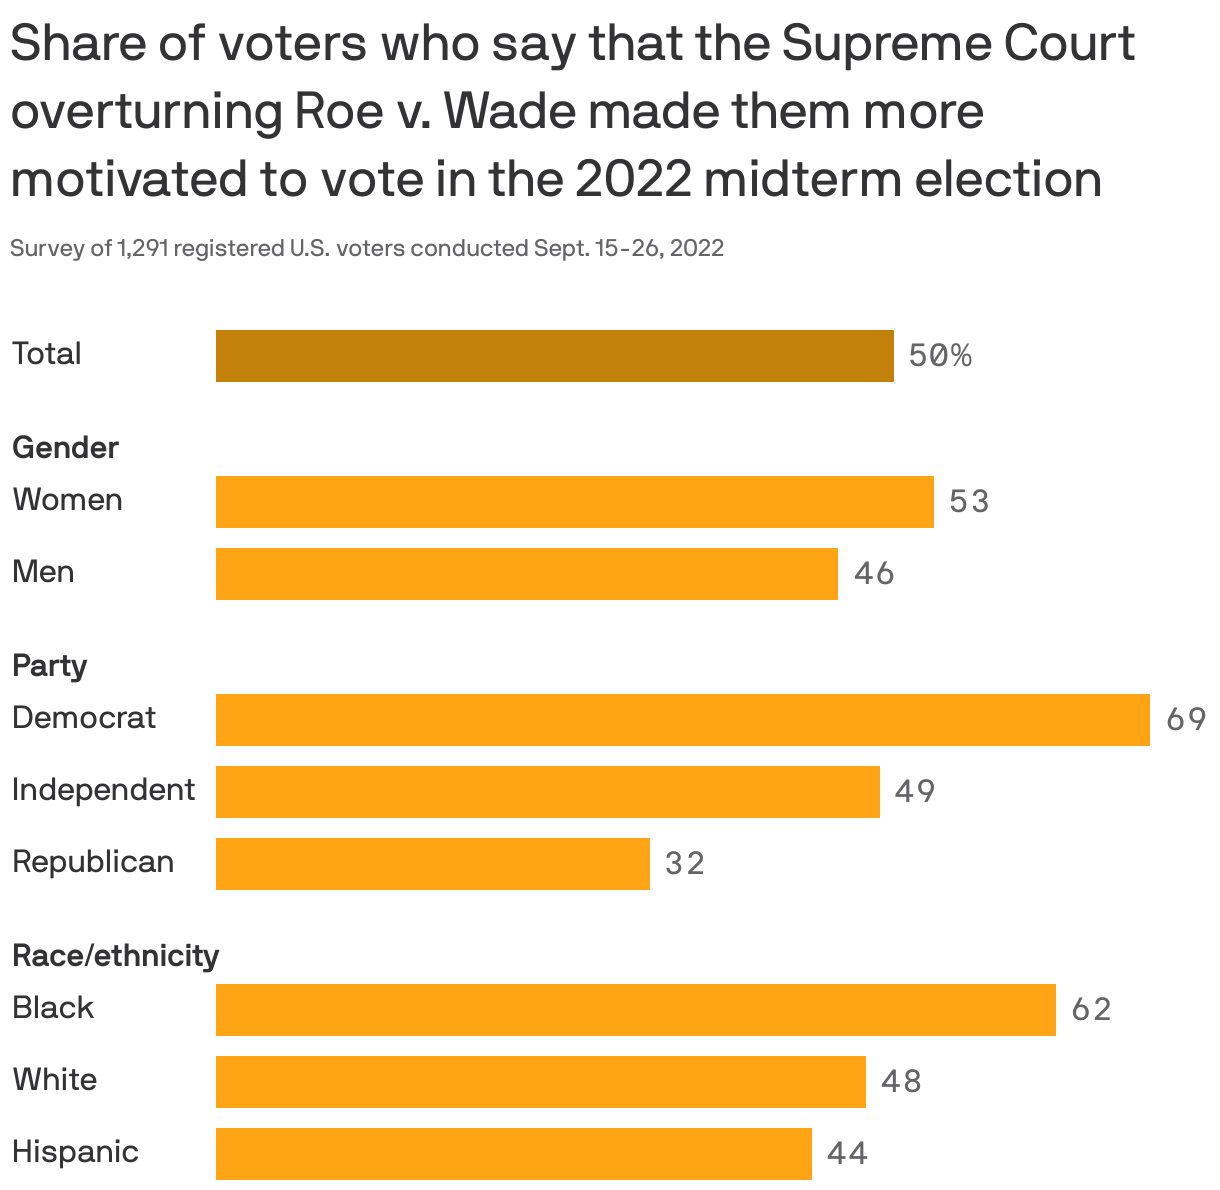 Share of voters who say that the Supreme Court overturning Roe v. Wade made them more motivated to vote in the 2022 midterm election